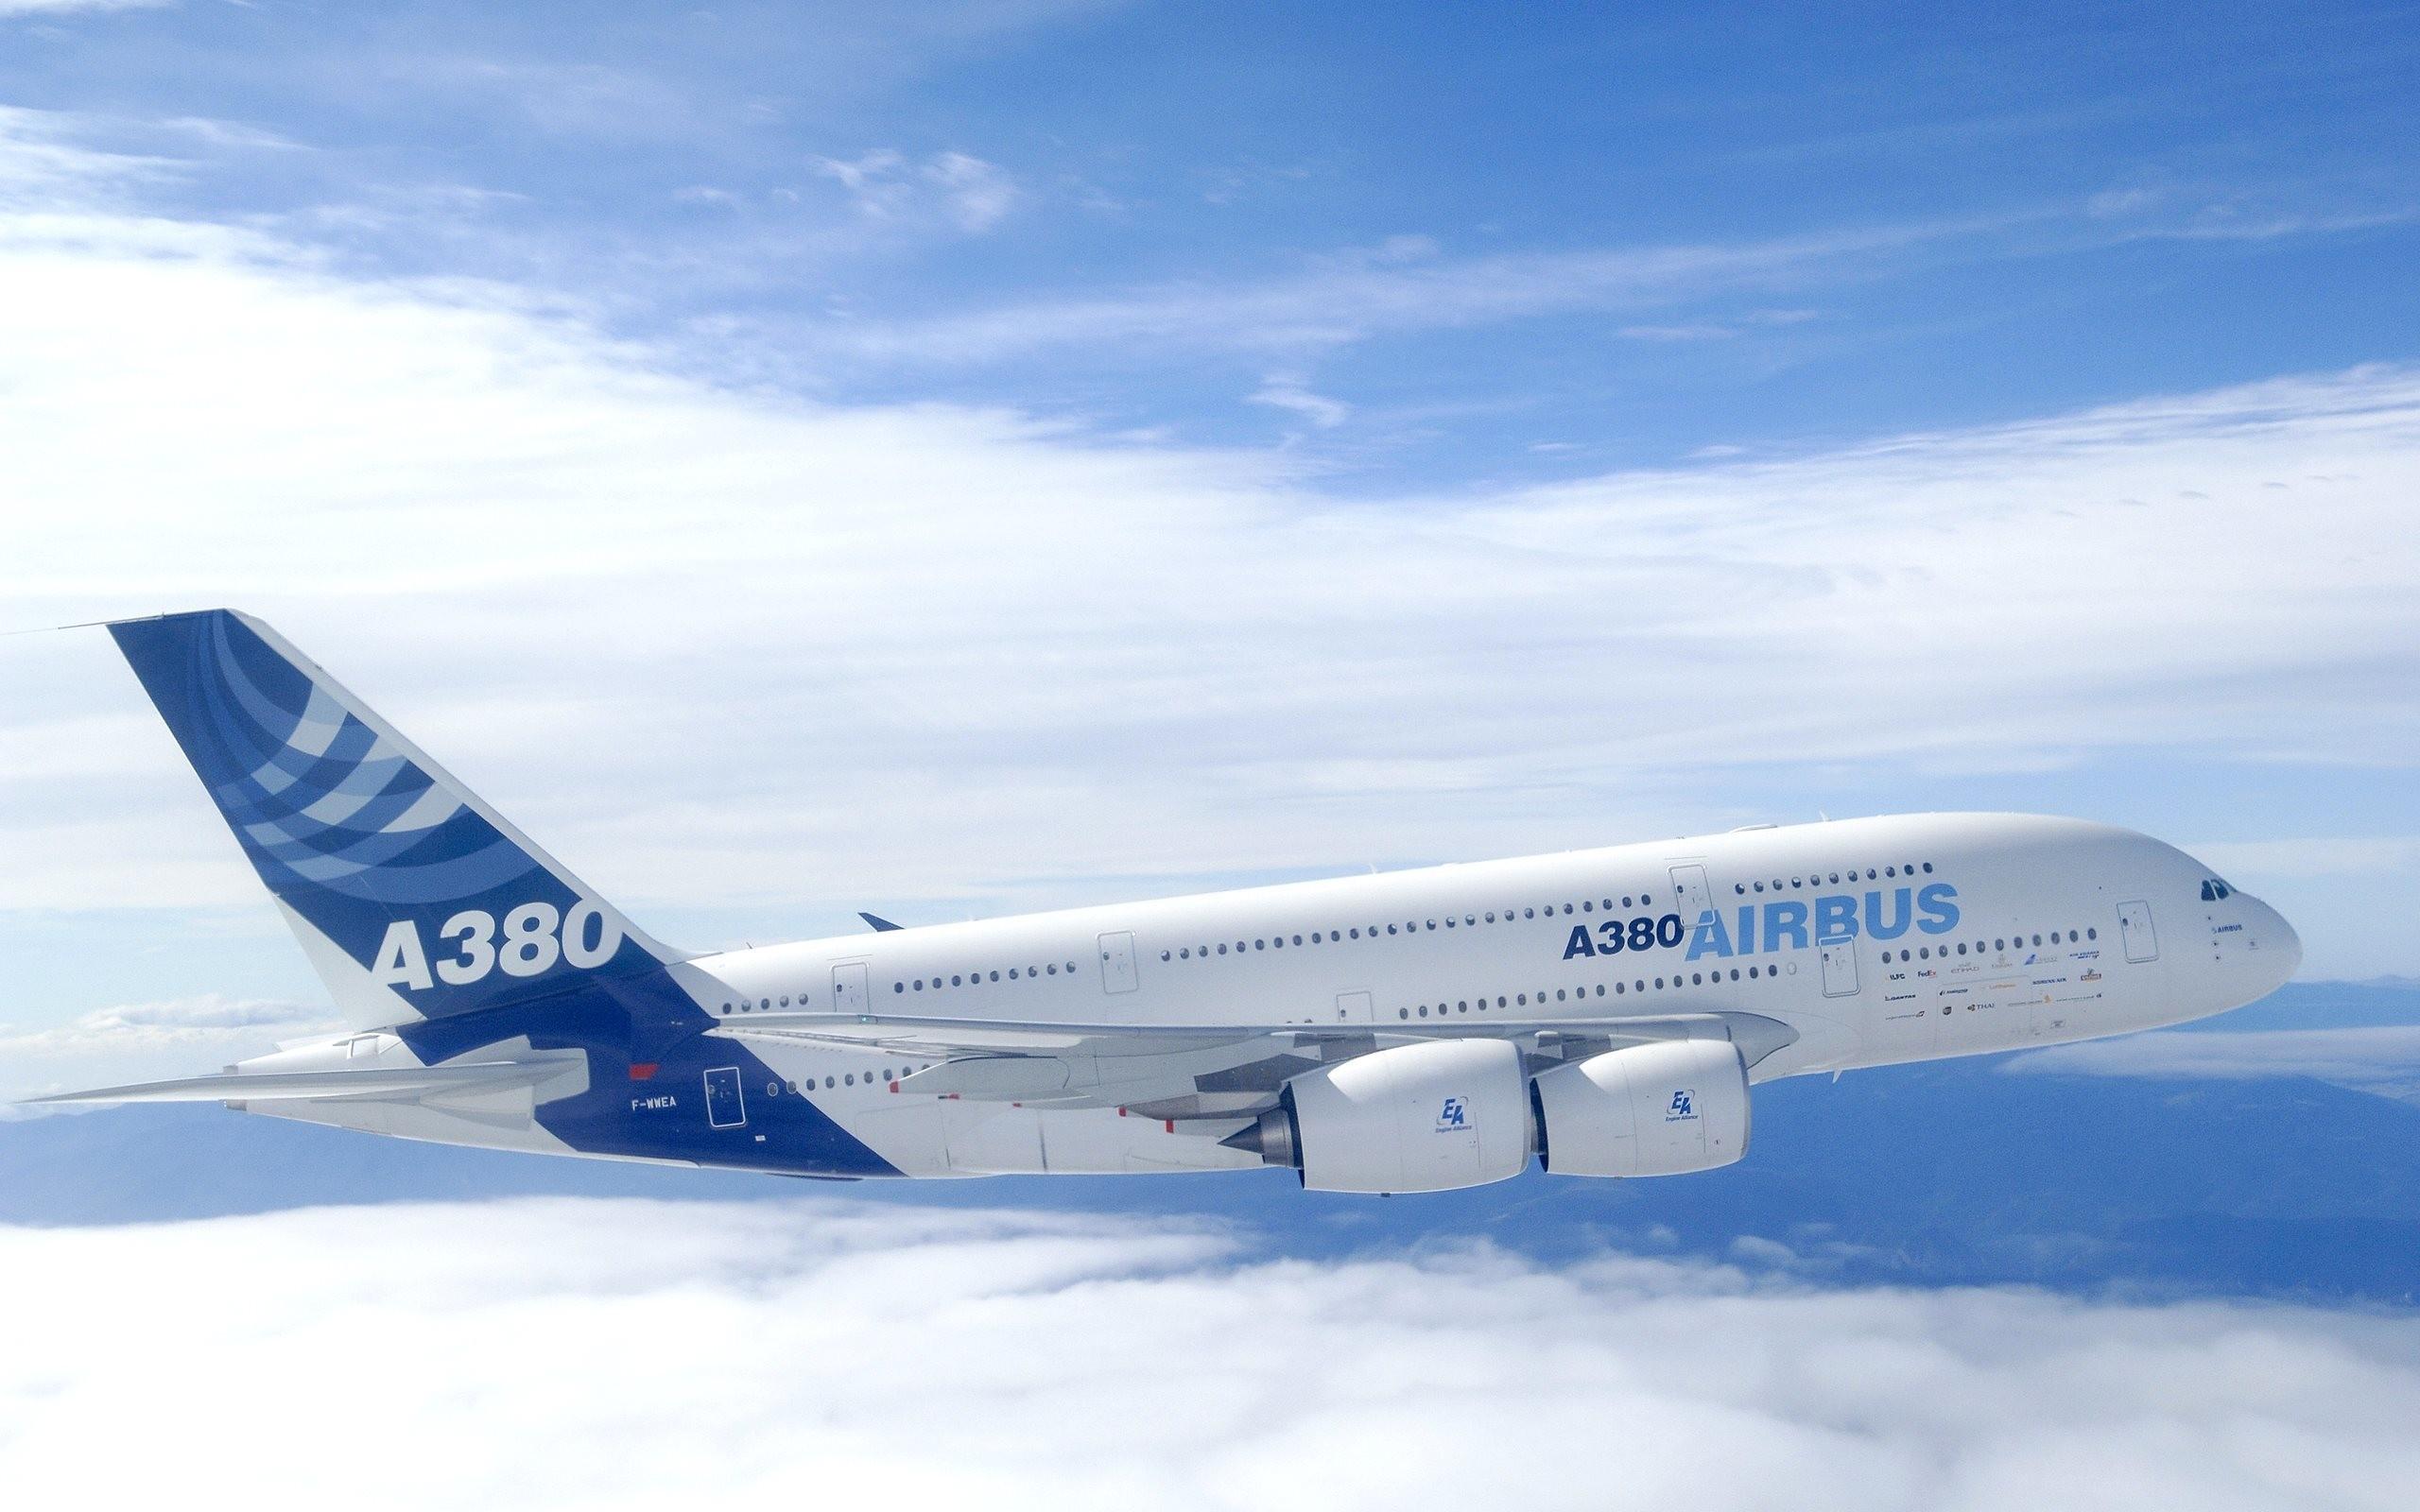 Airbus Wallpaper background picture